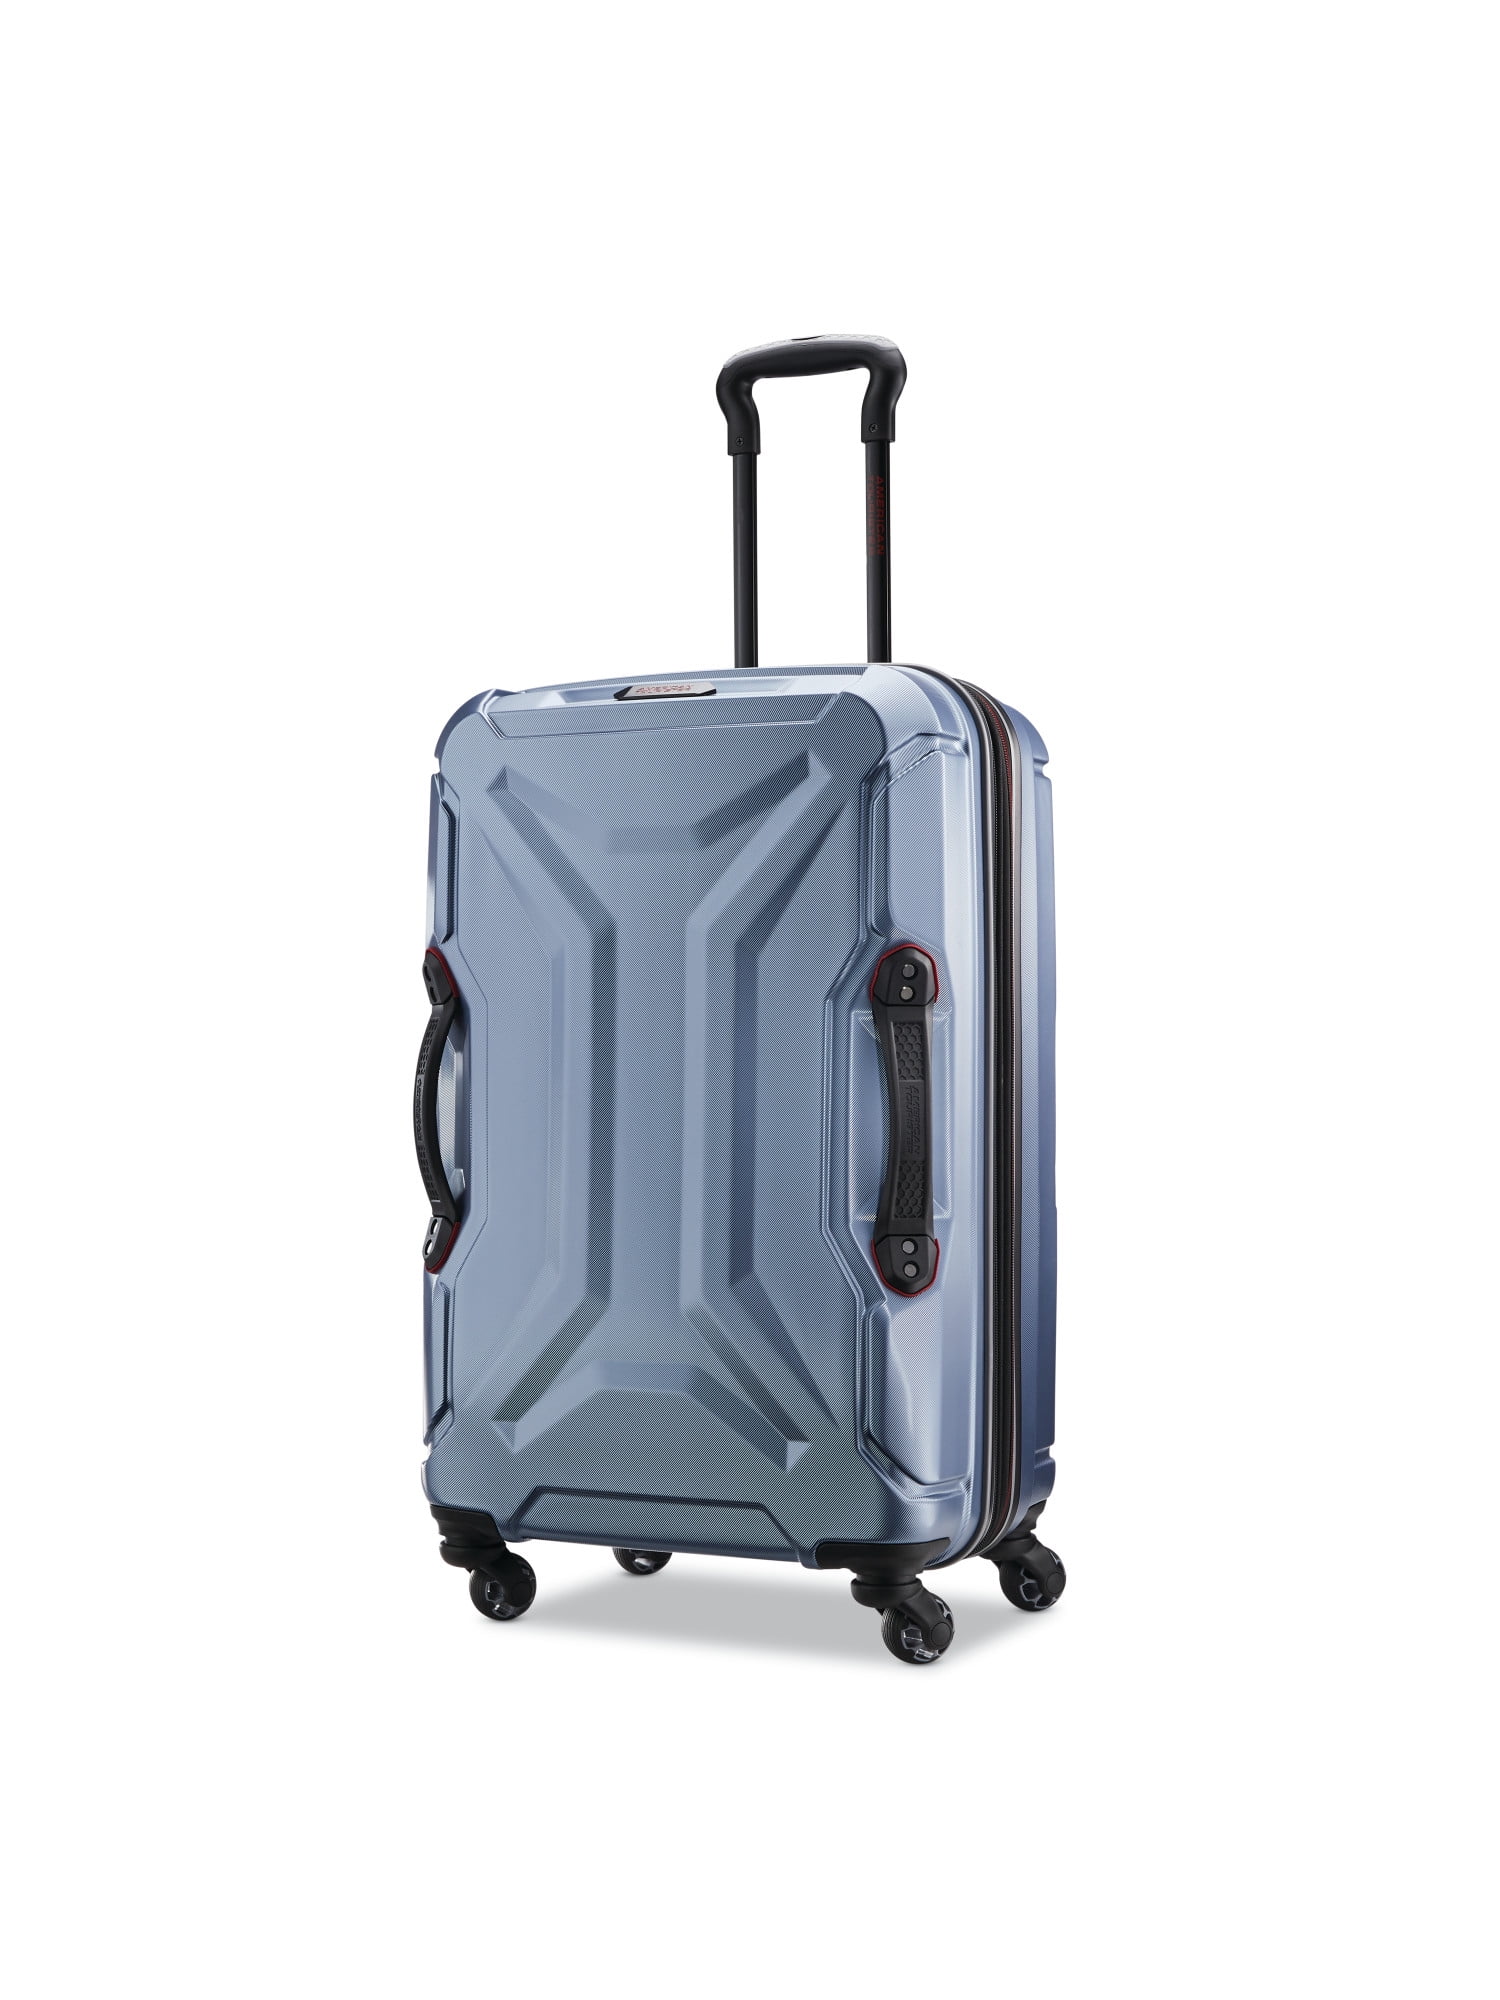 Tourister Cargo Max 25" Spinner Luggage, Blue -